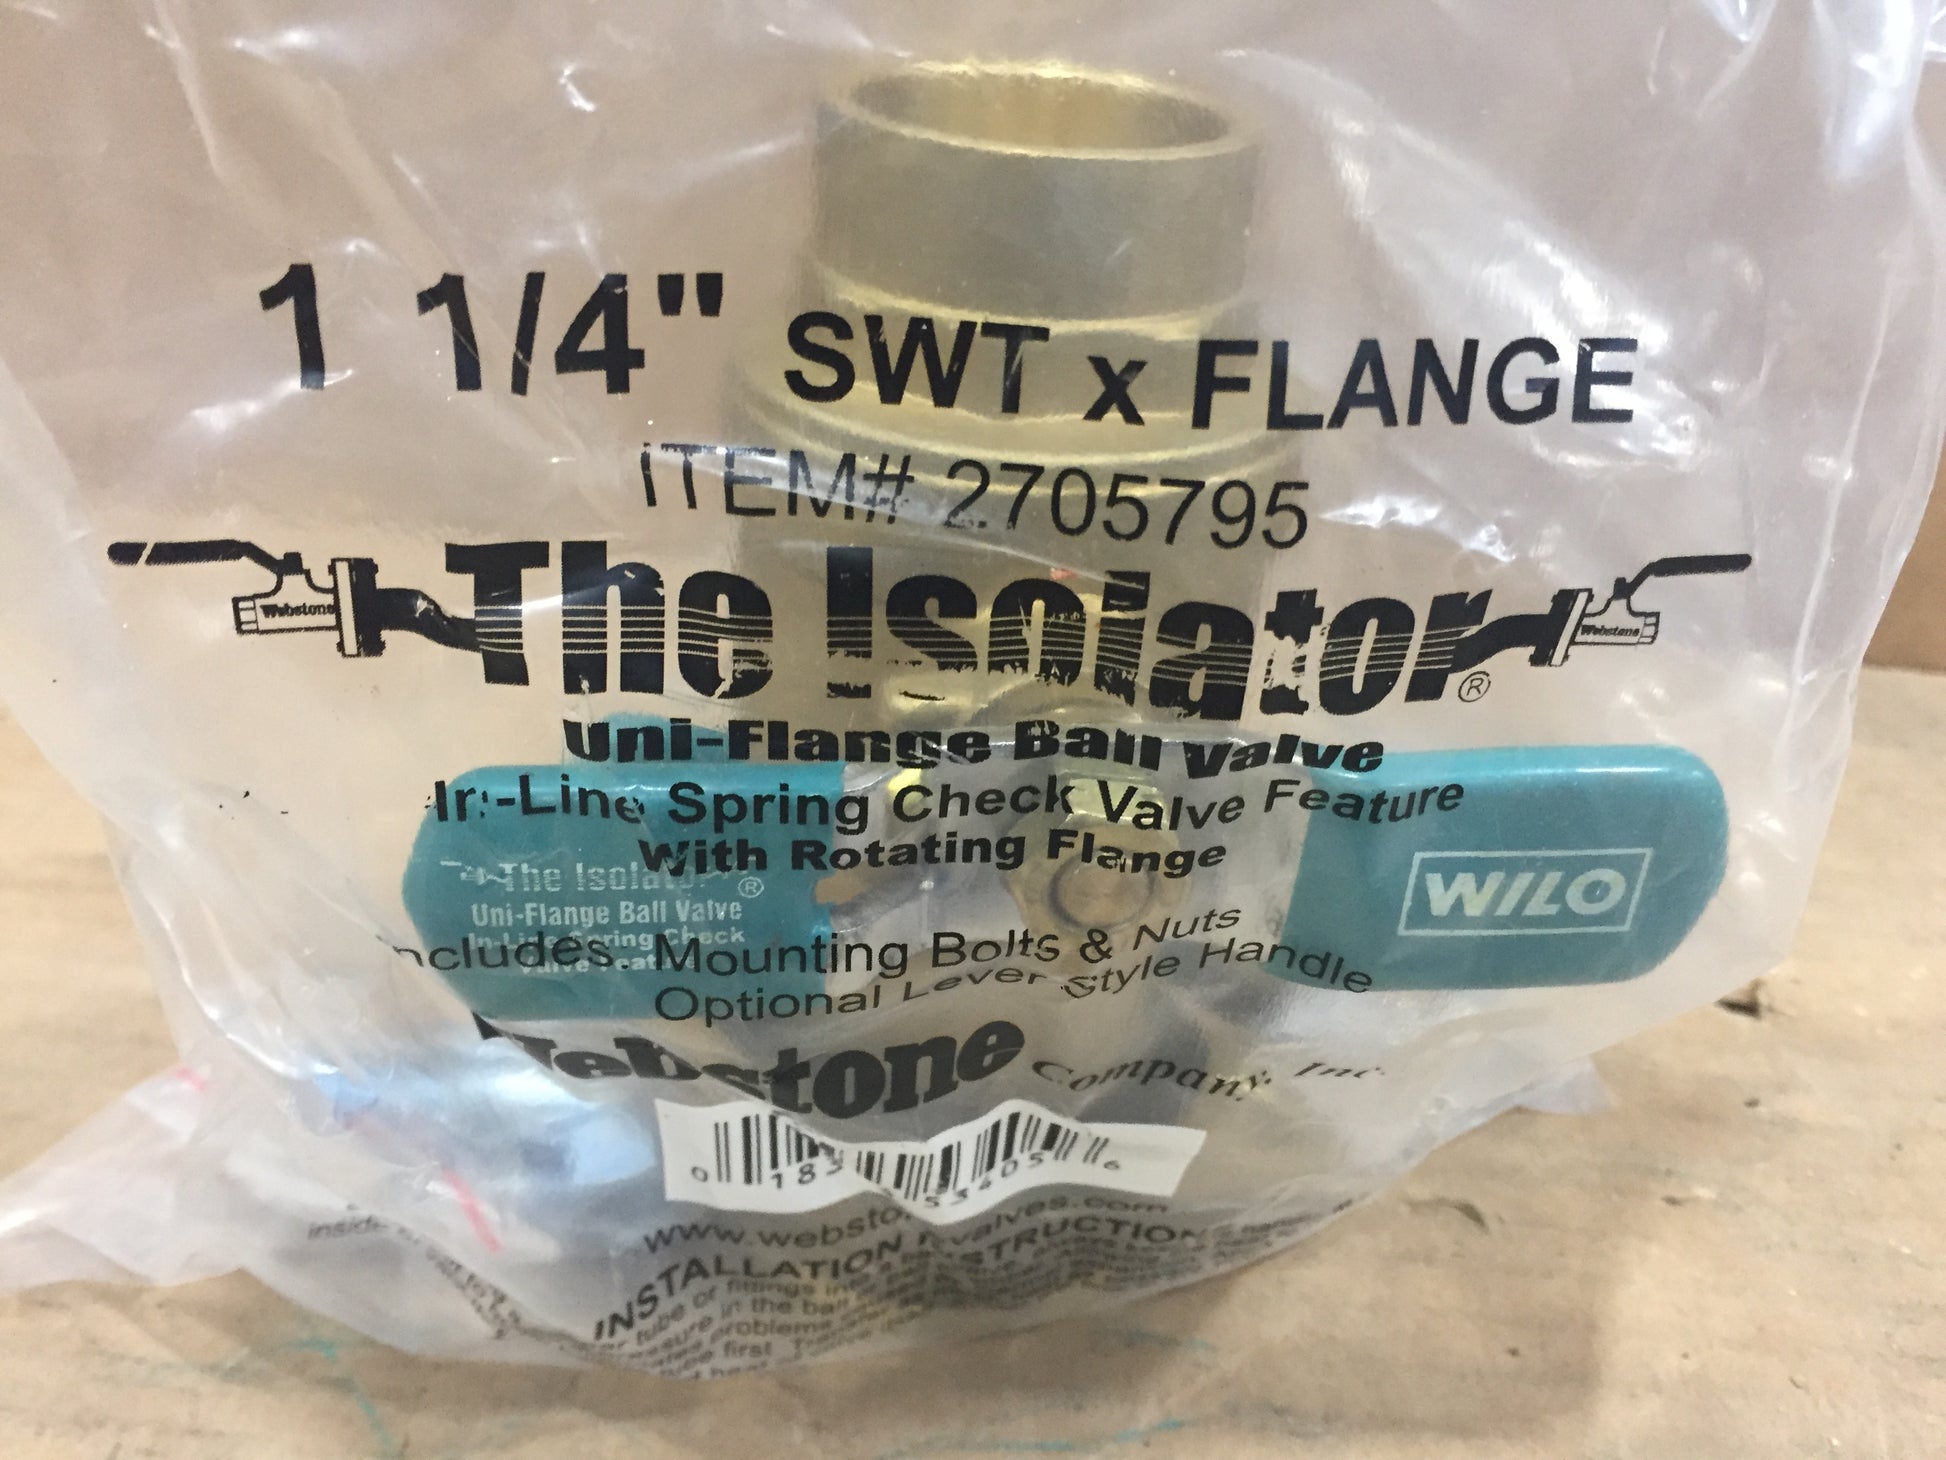 1-1/4" SWEAT X FLANGE BALL VALVE W/ IN-LINE SPRING CHECK VALVE WITH ROTATING FLANGE